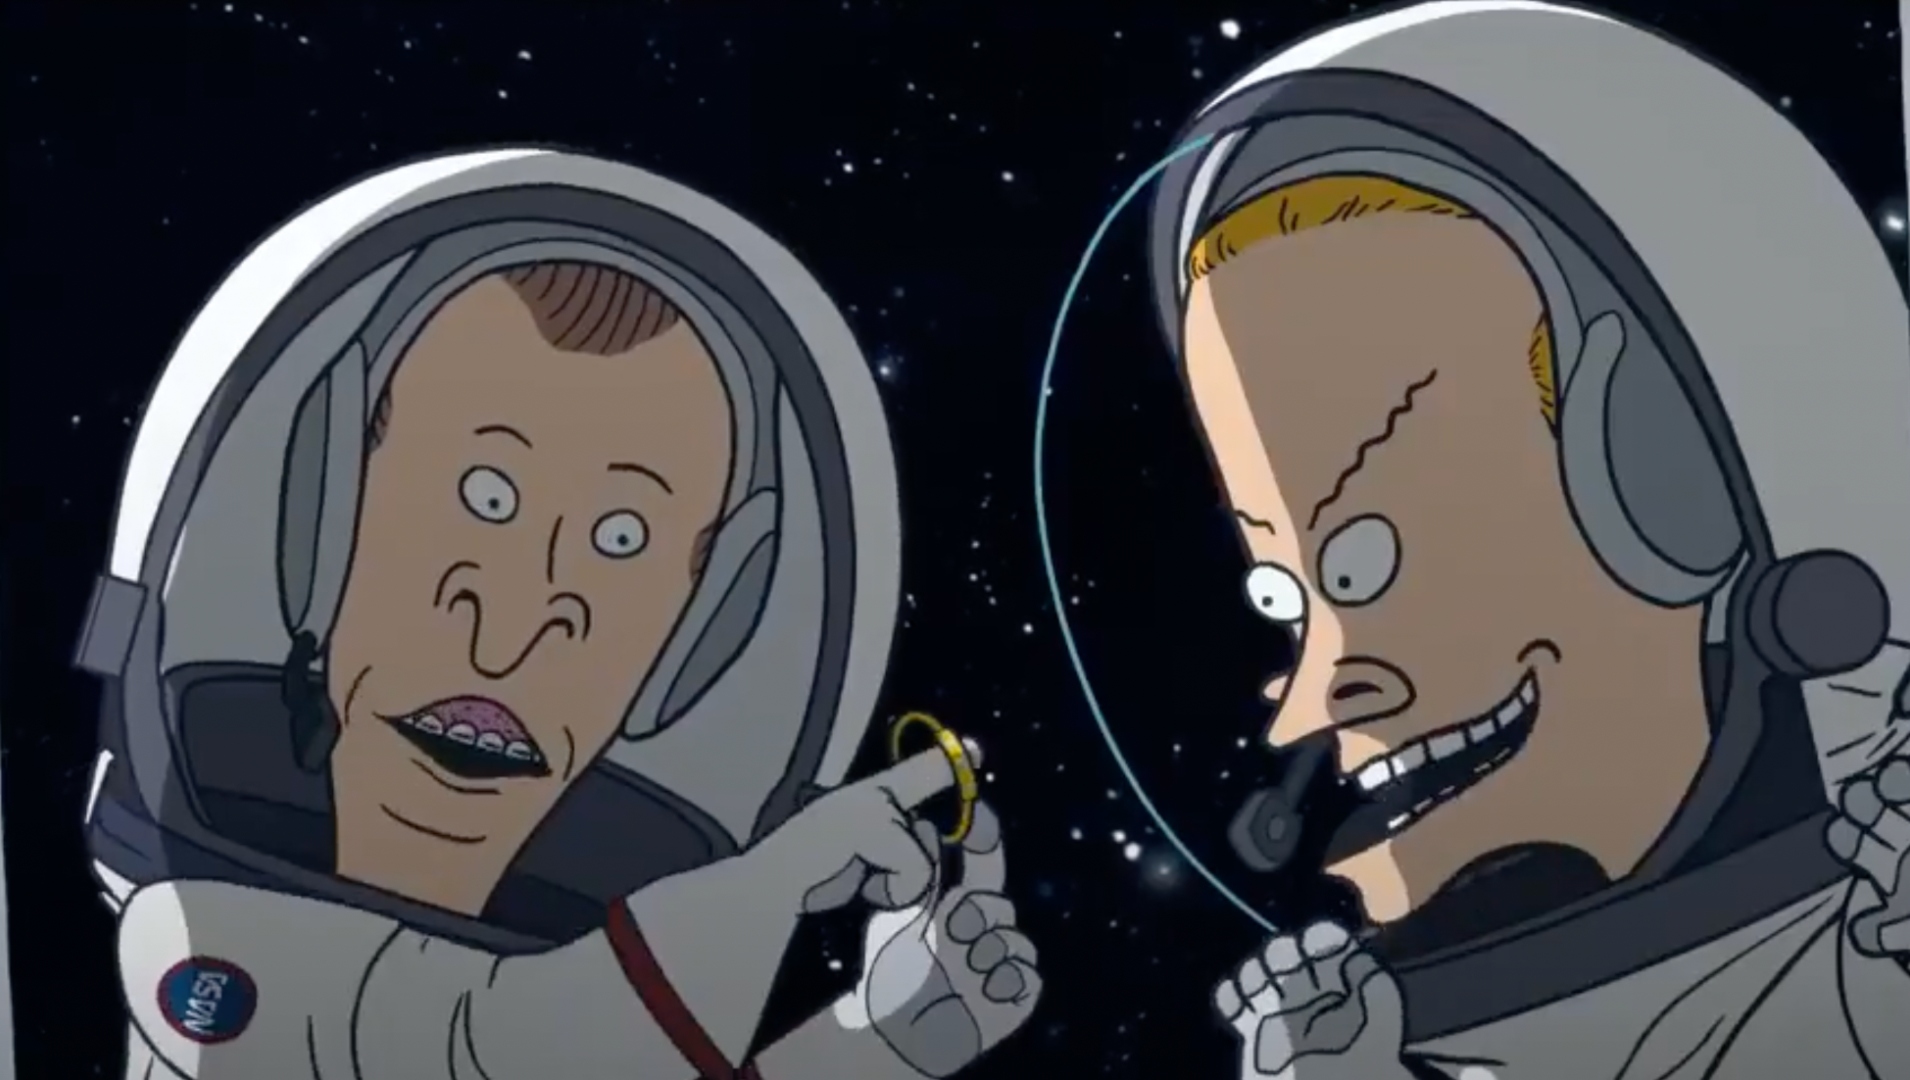 beavis and butthead do the universe